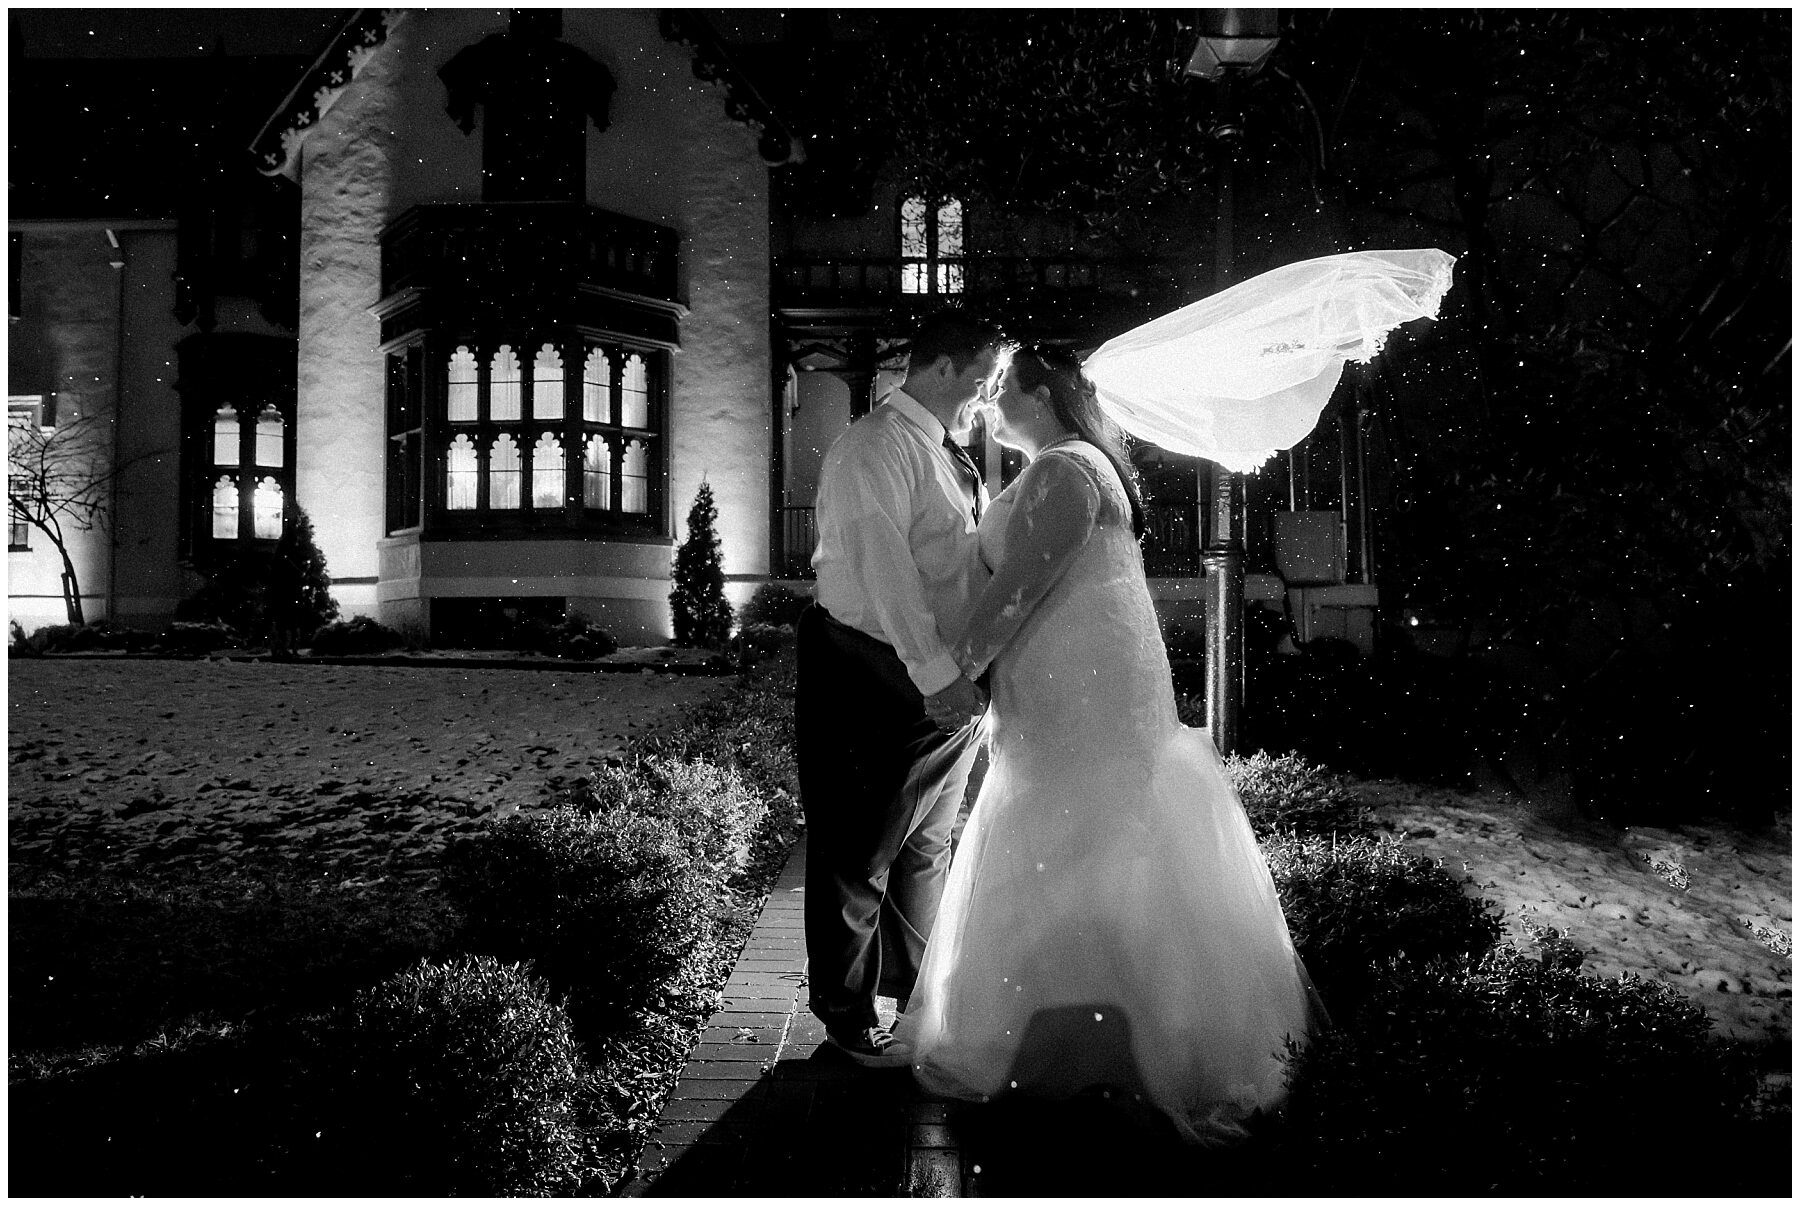 bride and groom standing in front of a mansion with snow falling around them at night veil flying back